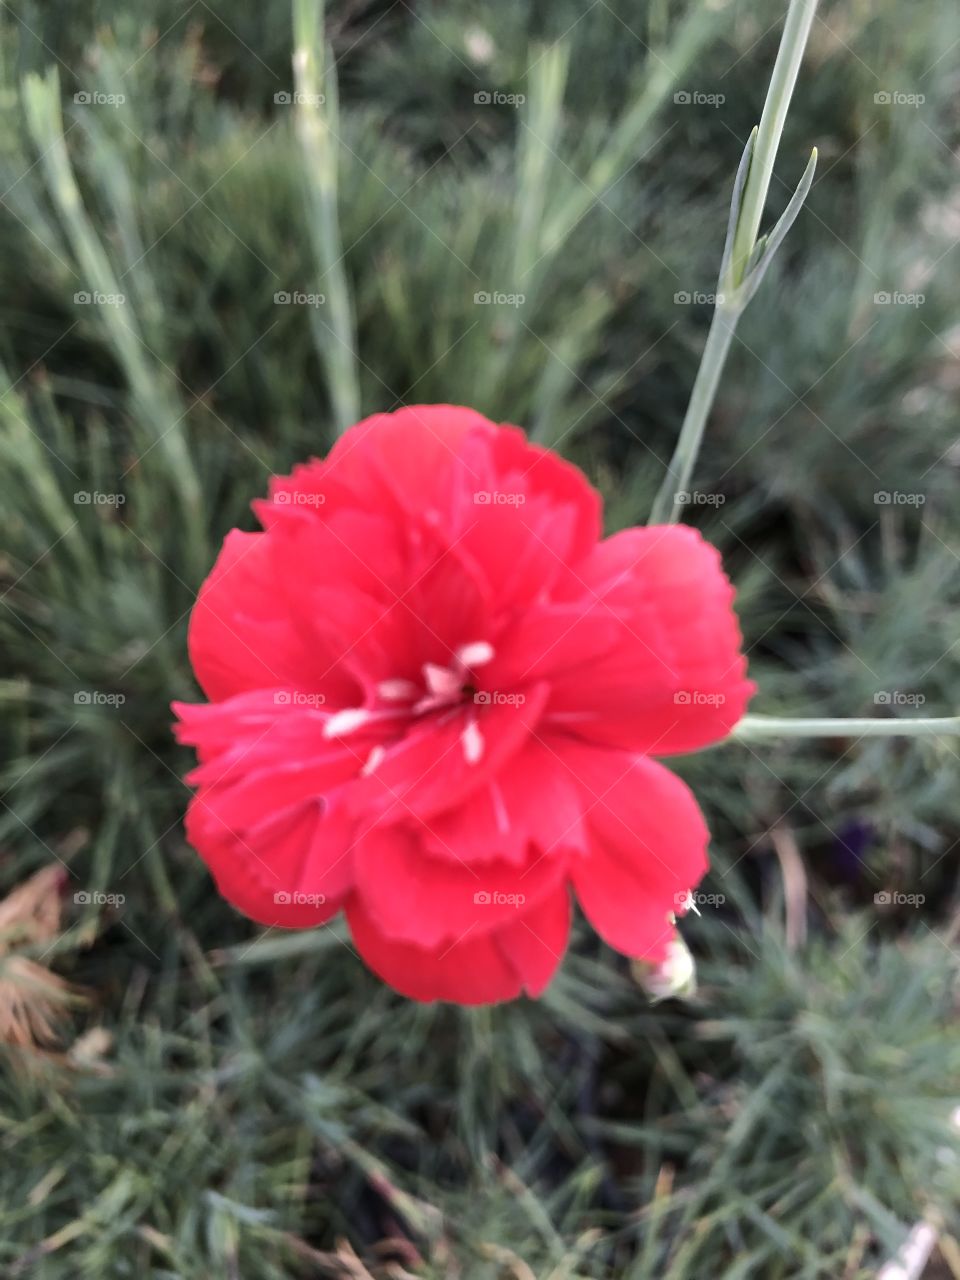 A close up of Dianthus ‘David’ blooming it’s beauty red flowers again. -Ladscape gardening can be wonderful too